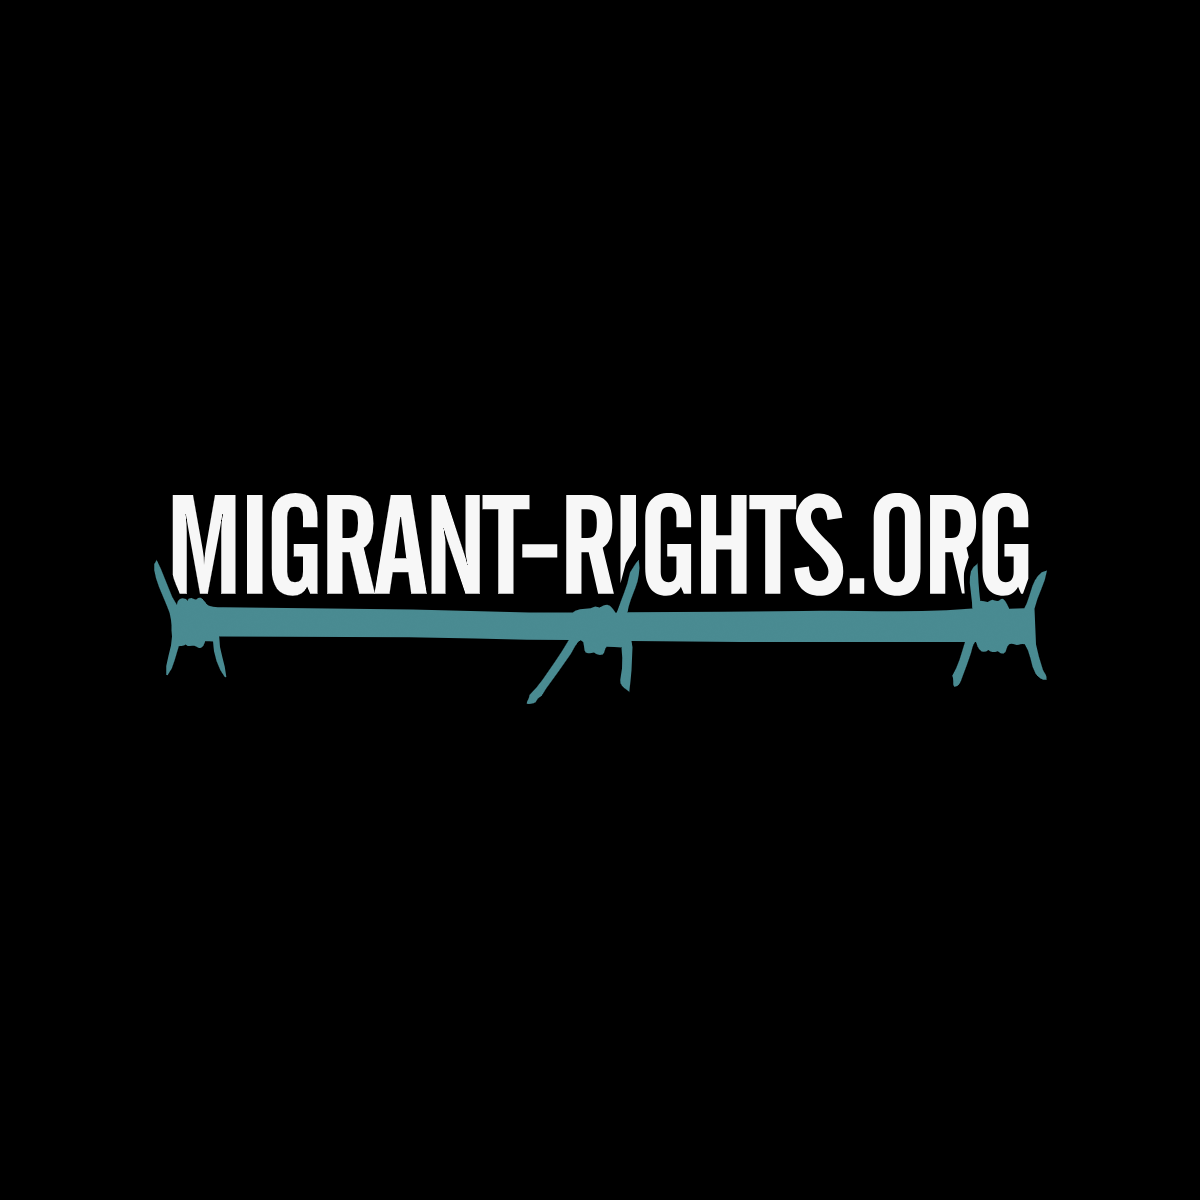 www.migrant-rights.org